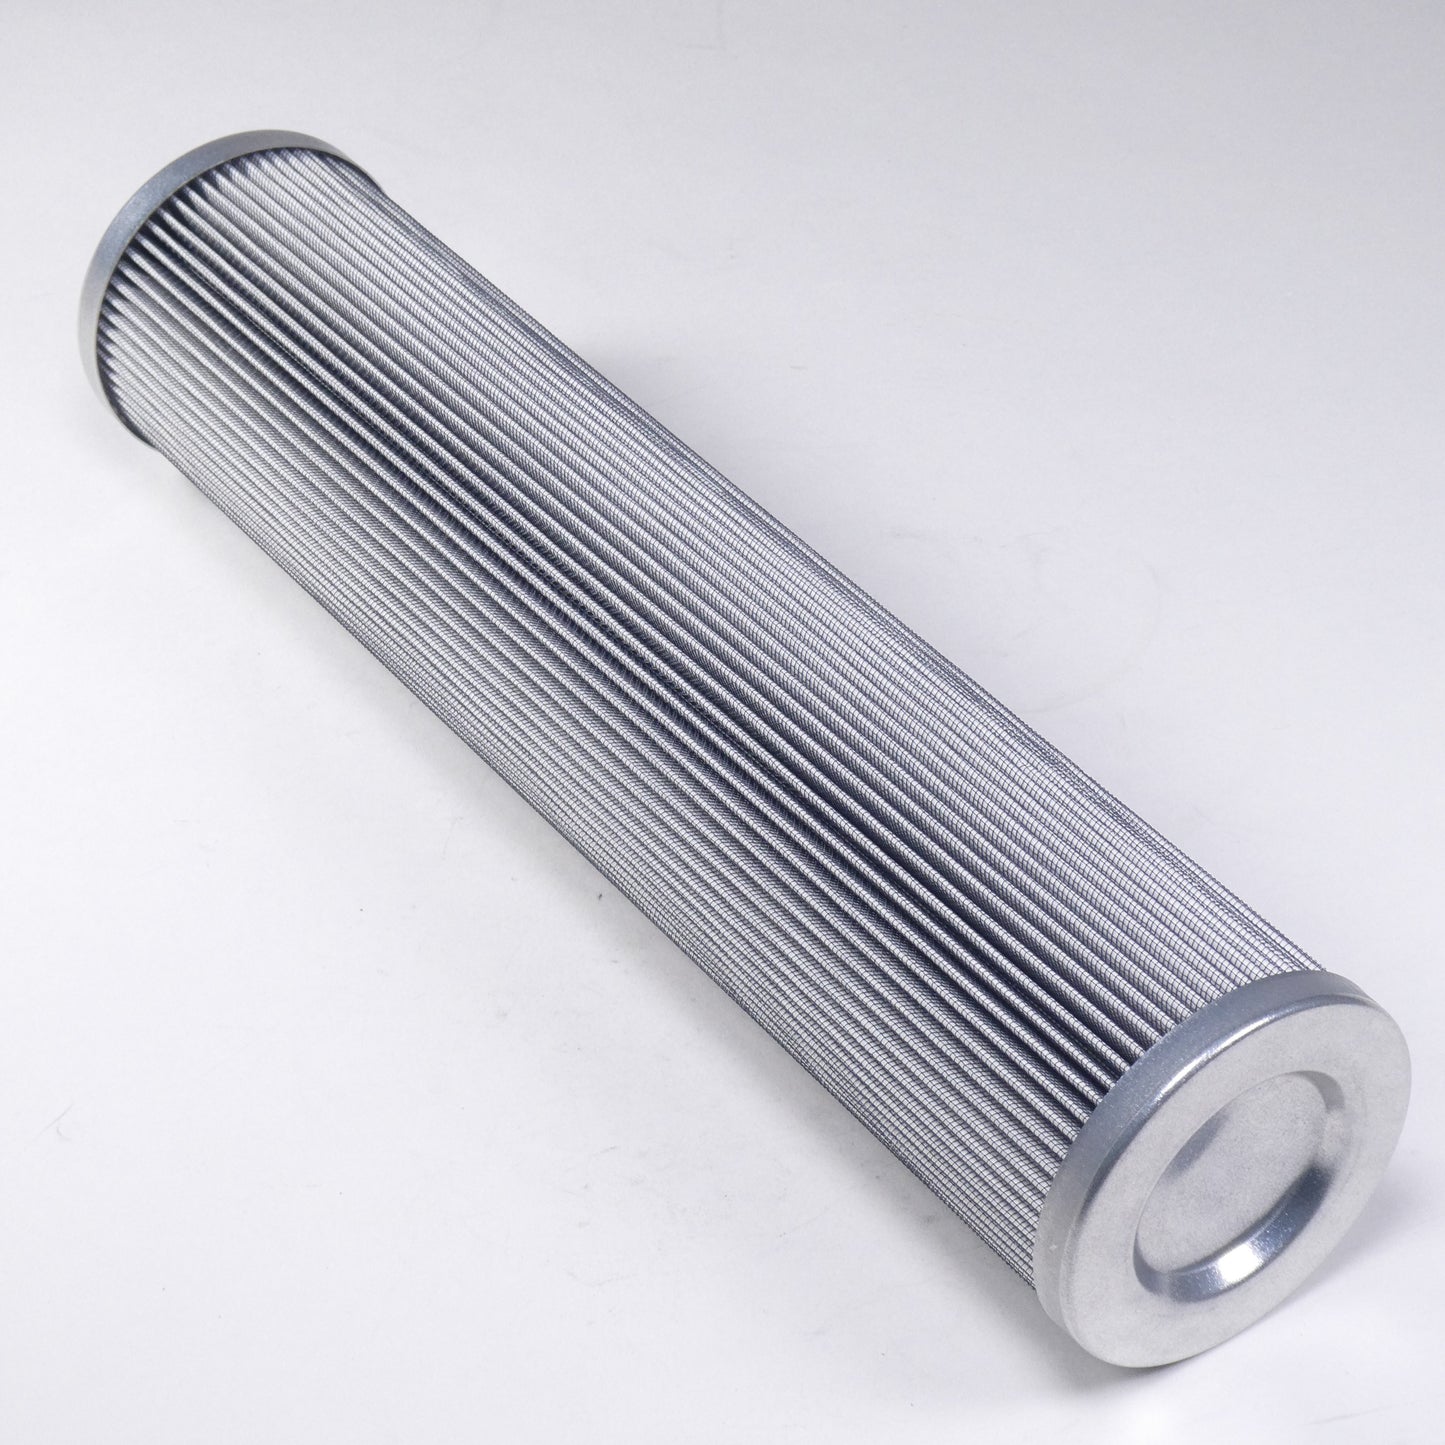 Hydrafil Replacement Filter Element for Filtersoft H8939MCV